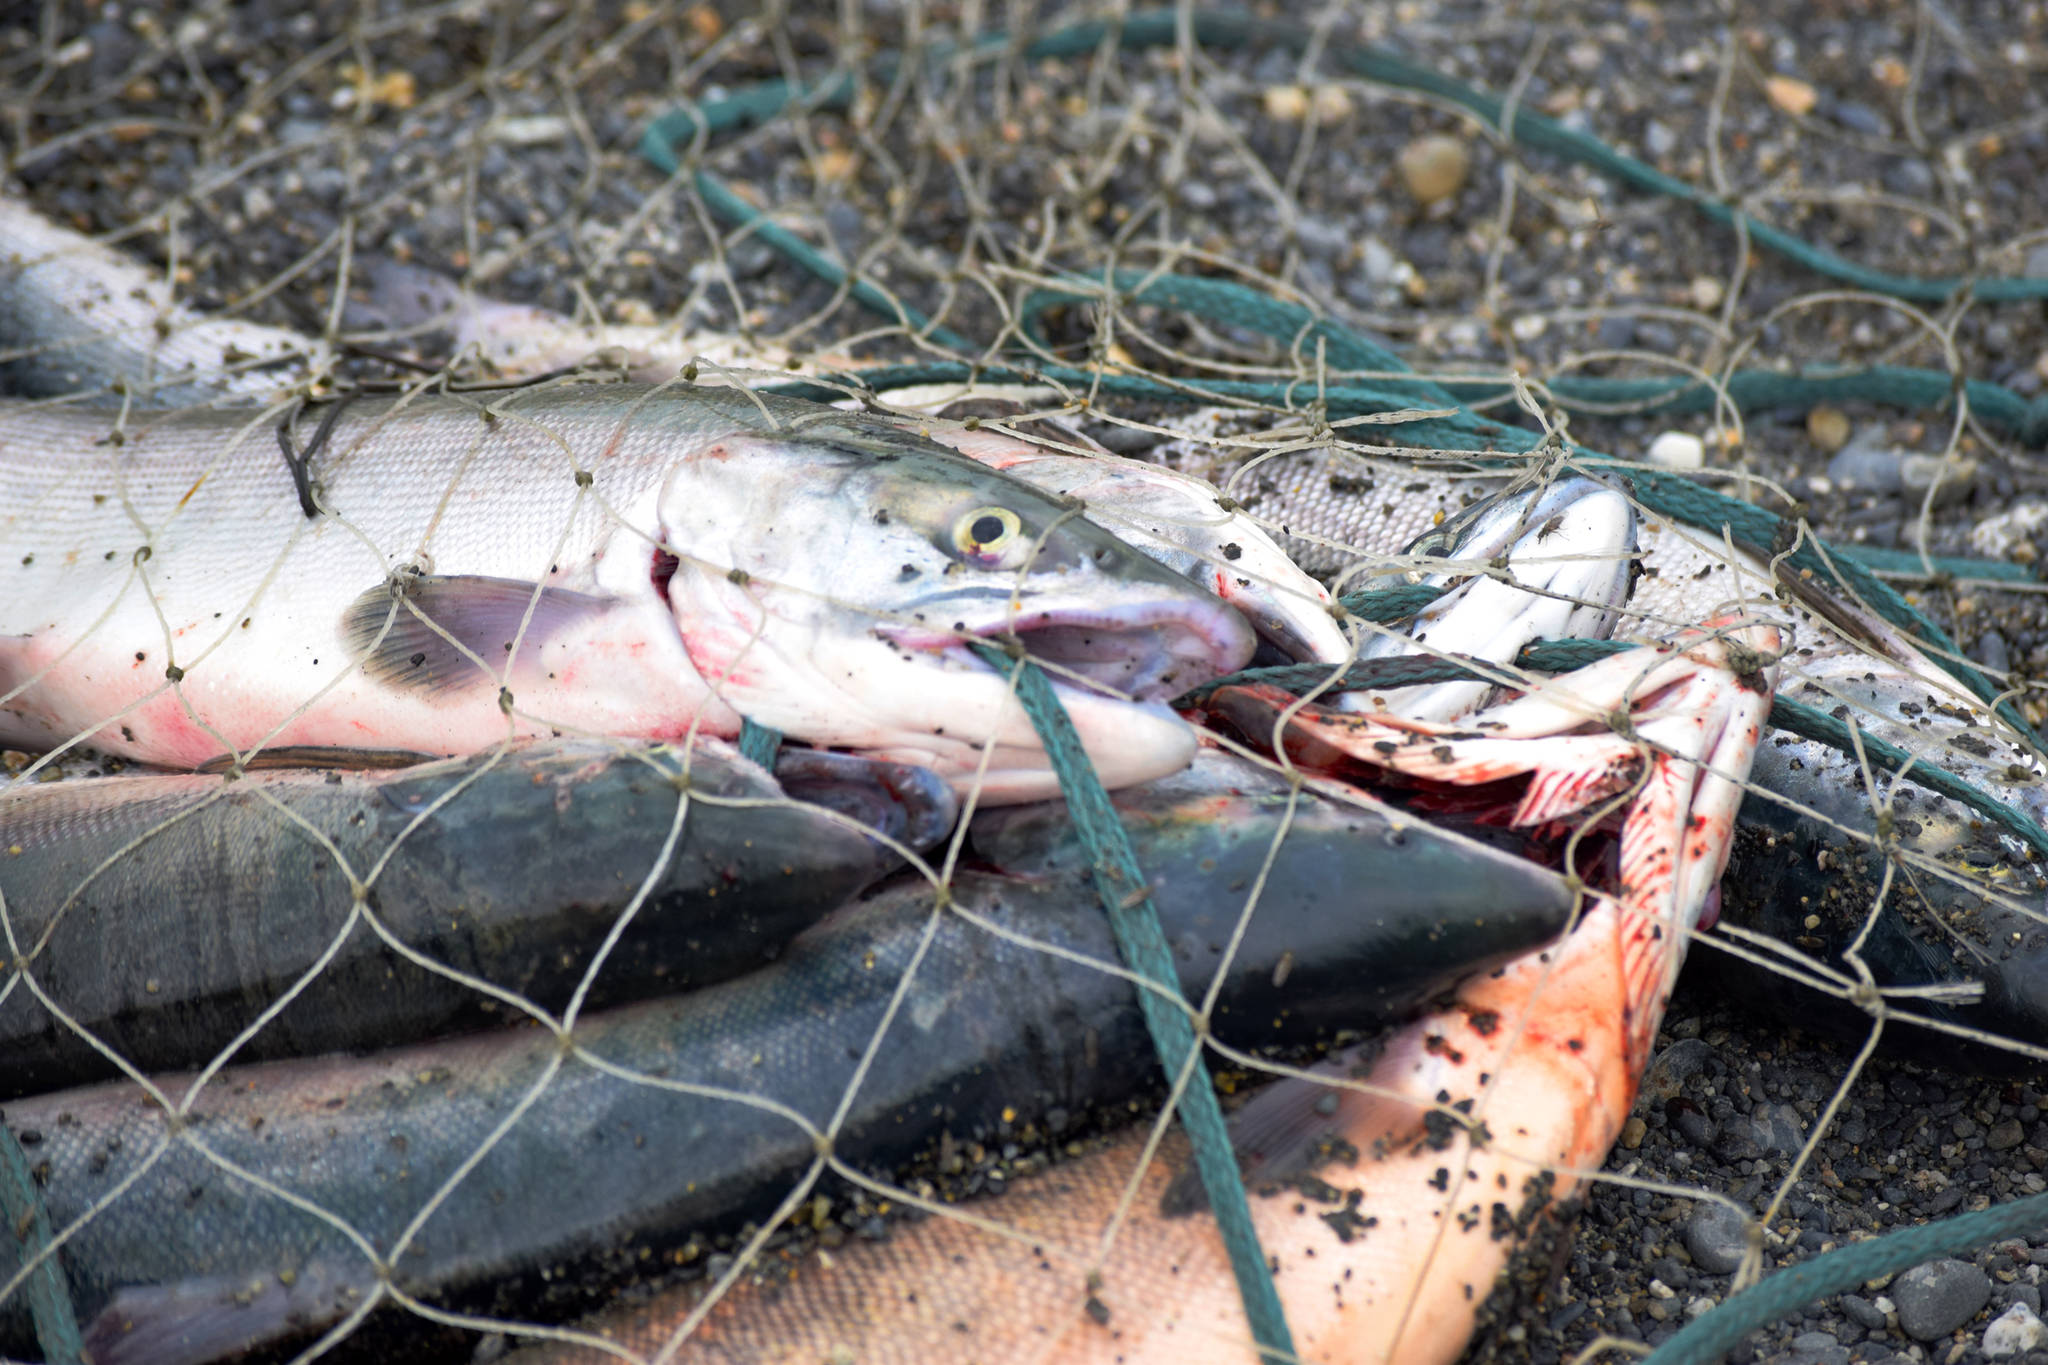 A fisherman’s stringer of Kasilof River sockeye salmon caught in the personal-use dipnet fishery lies on the beach on Tuesday, July 31, 2018 in Kasilof, Alaska. (Photo by Elizabeth Earl/Peninsula Clarion)